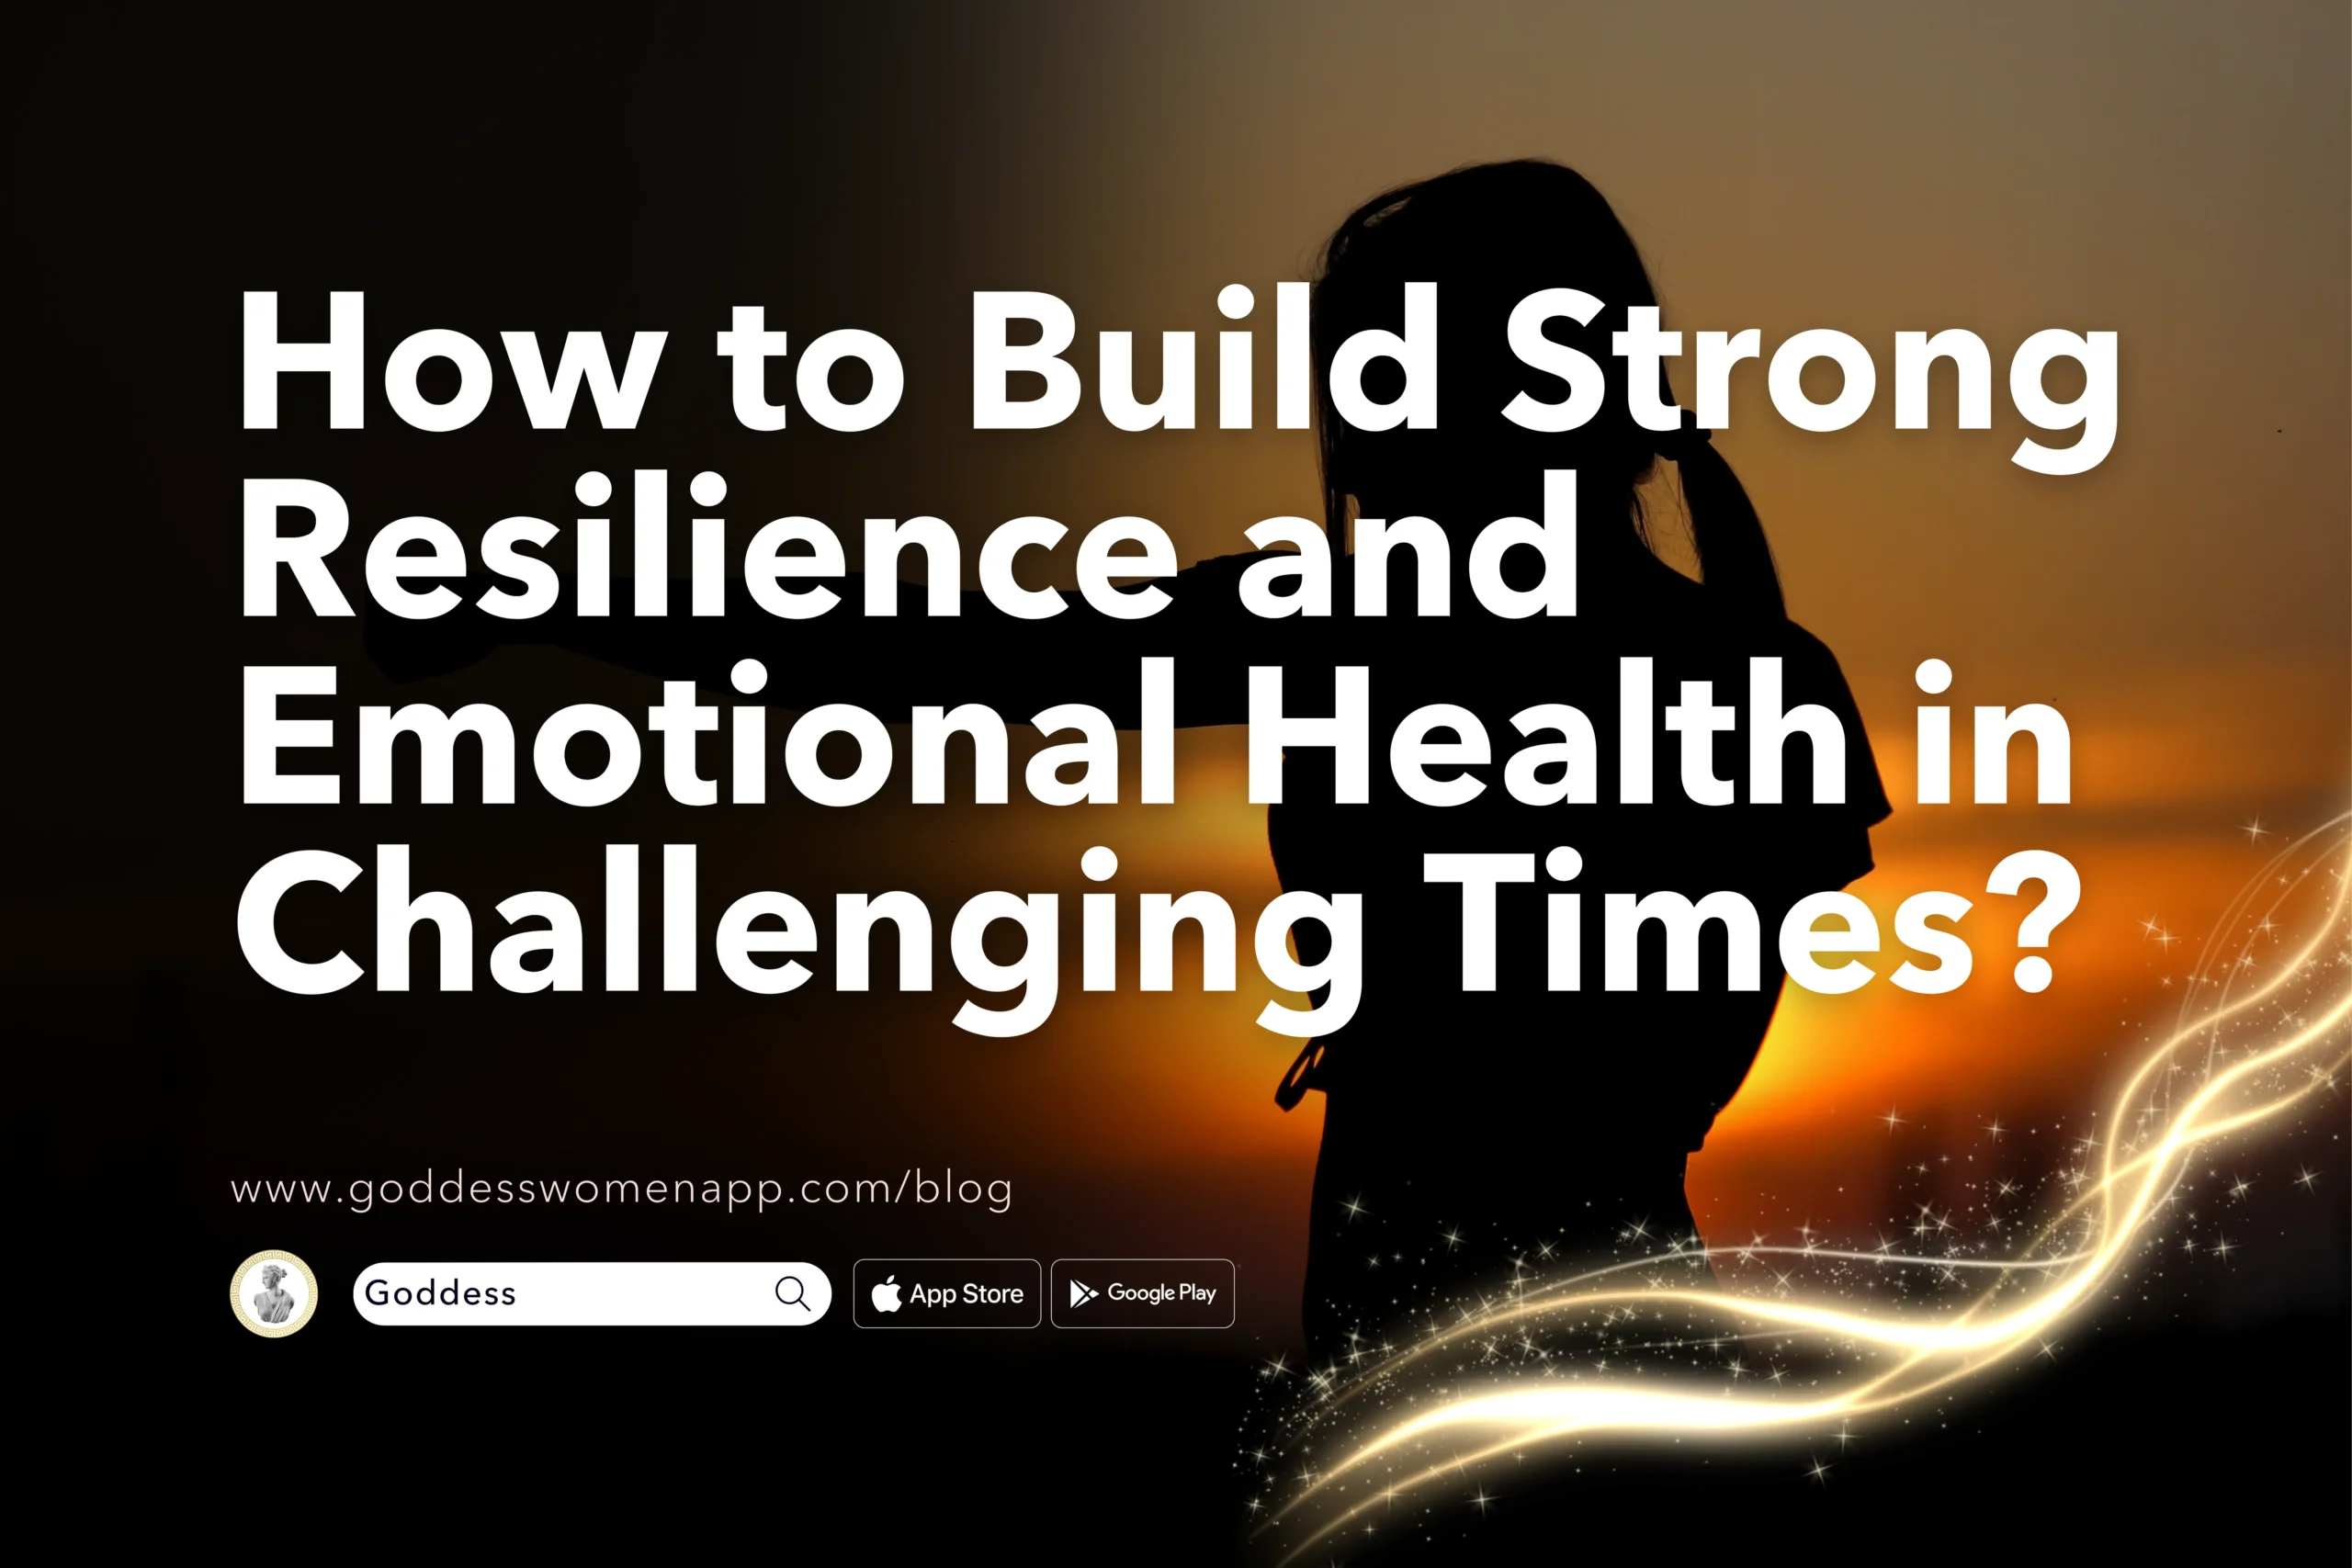 How to Build Strong Resilience and Emotional Health in Challenging Times?